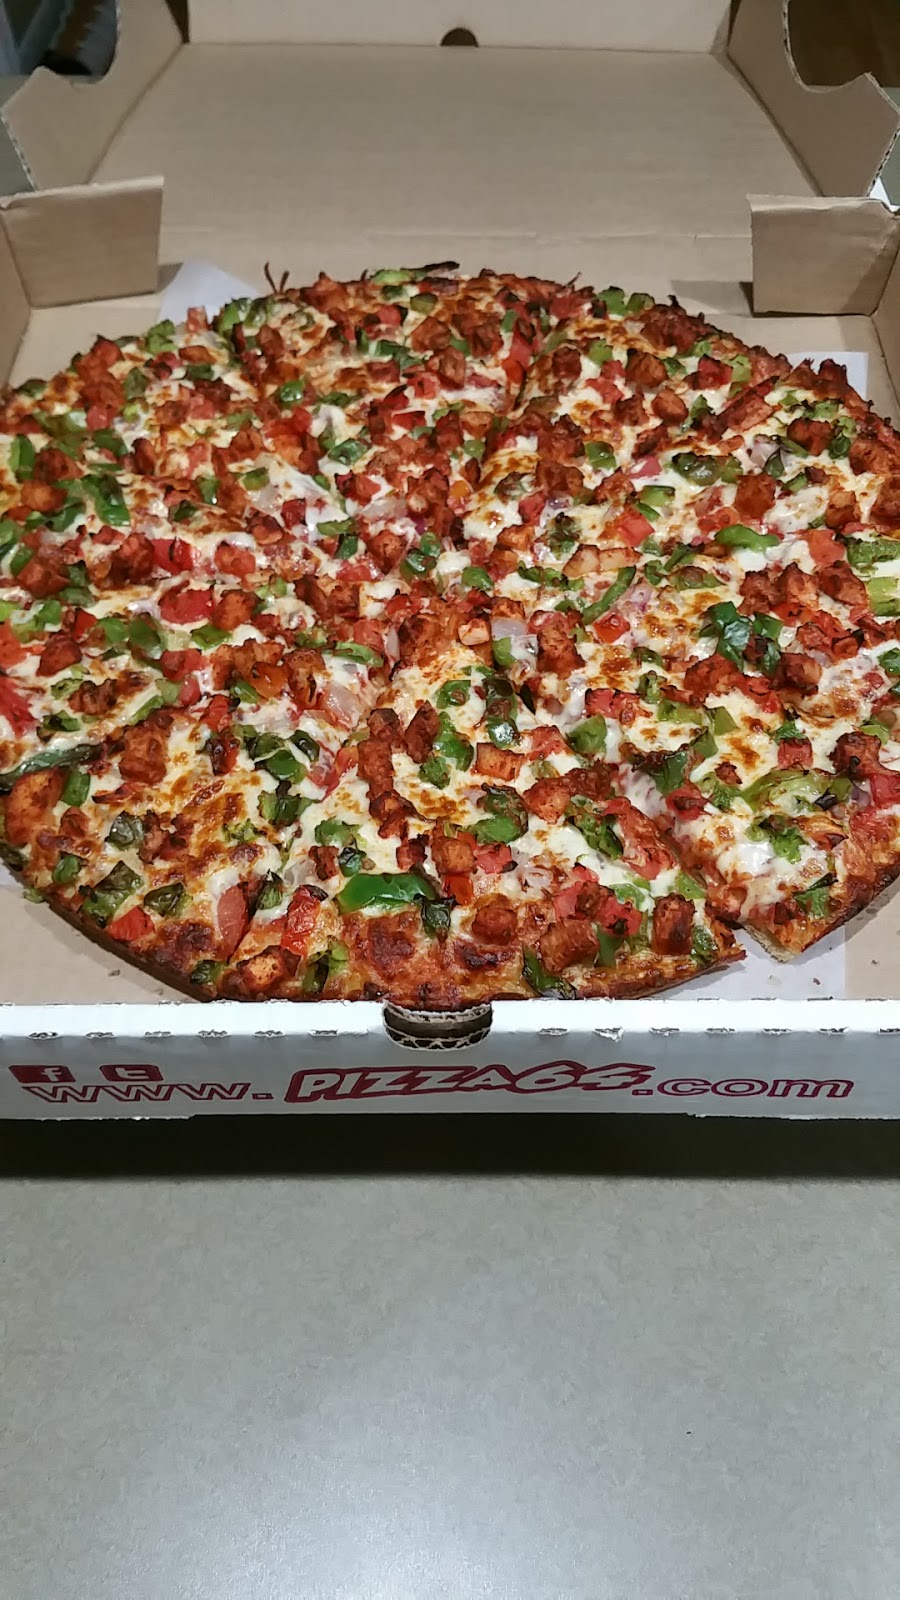 Pizza64 | meal delivery | 16780 64 Ave #101, Surrey, BC V3S 3Y2, Canada | 6043721000 OR +1 604-372-1000